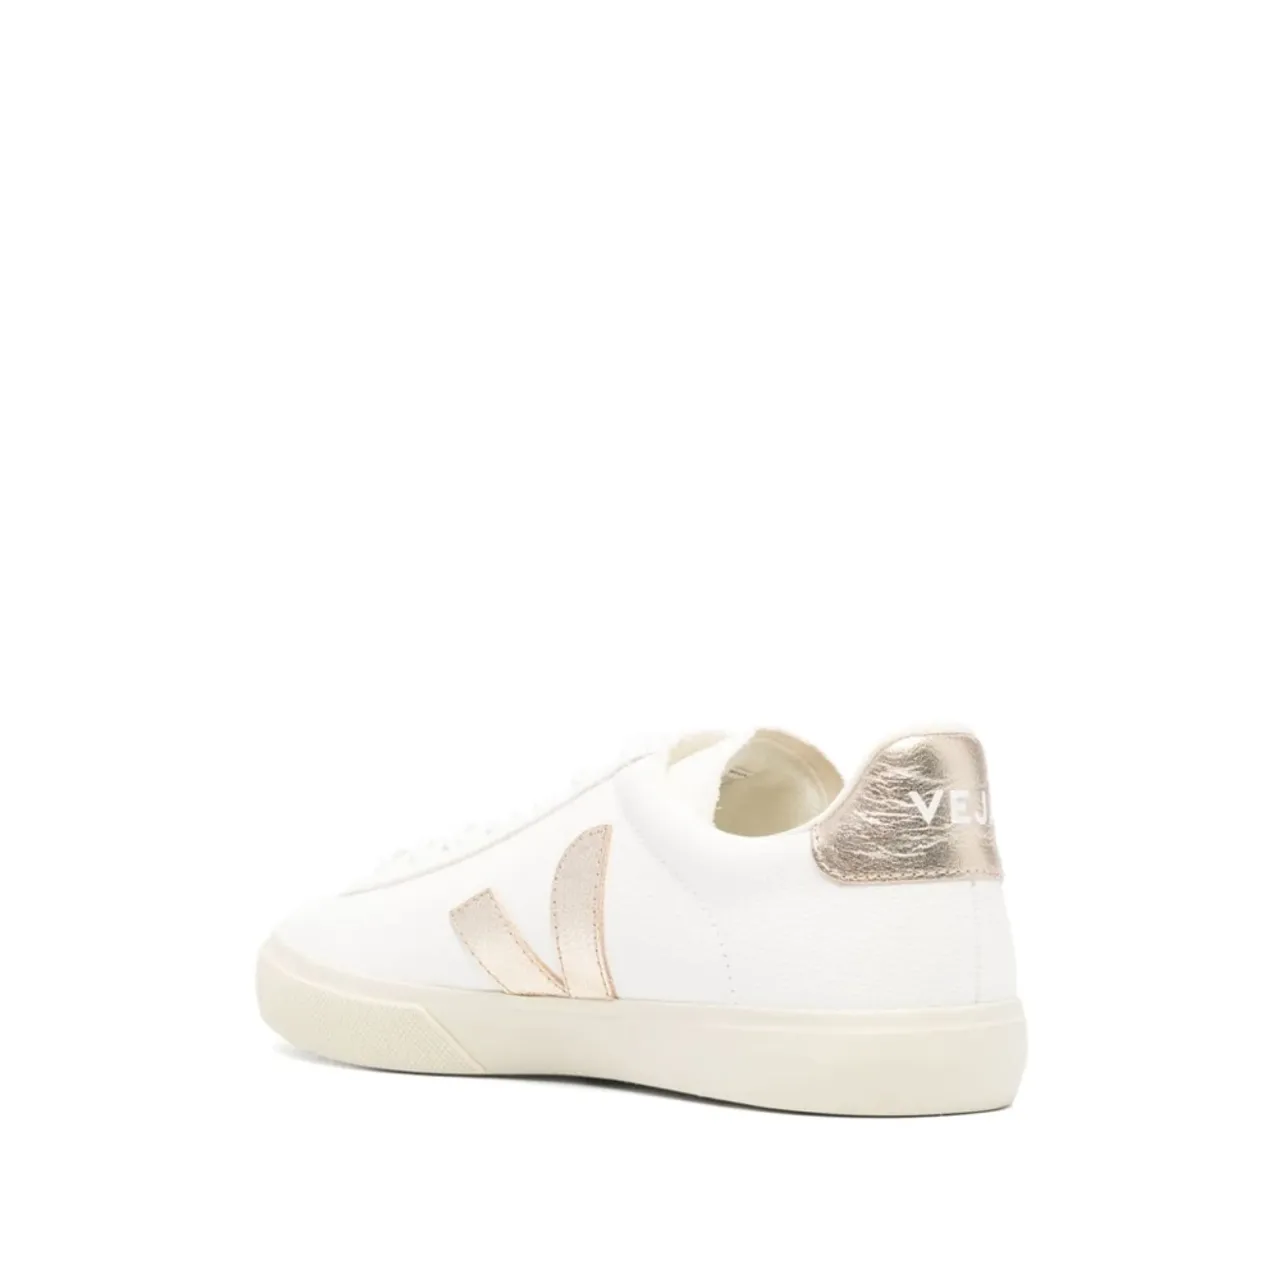 Veja , Men's Shoes Sneakers White Ss24 ,White male, Sizes: